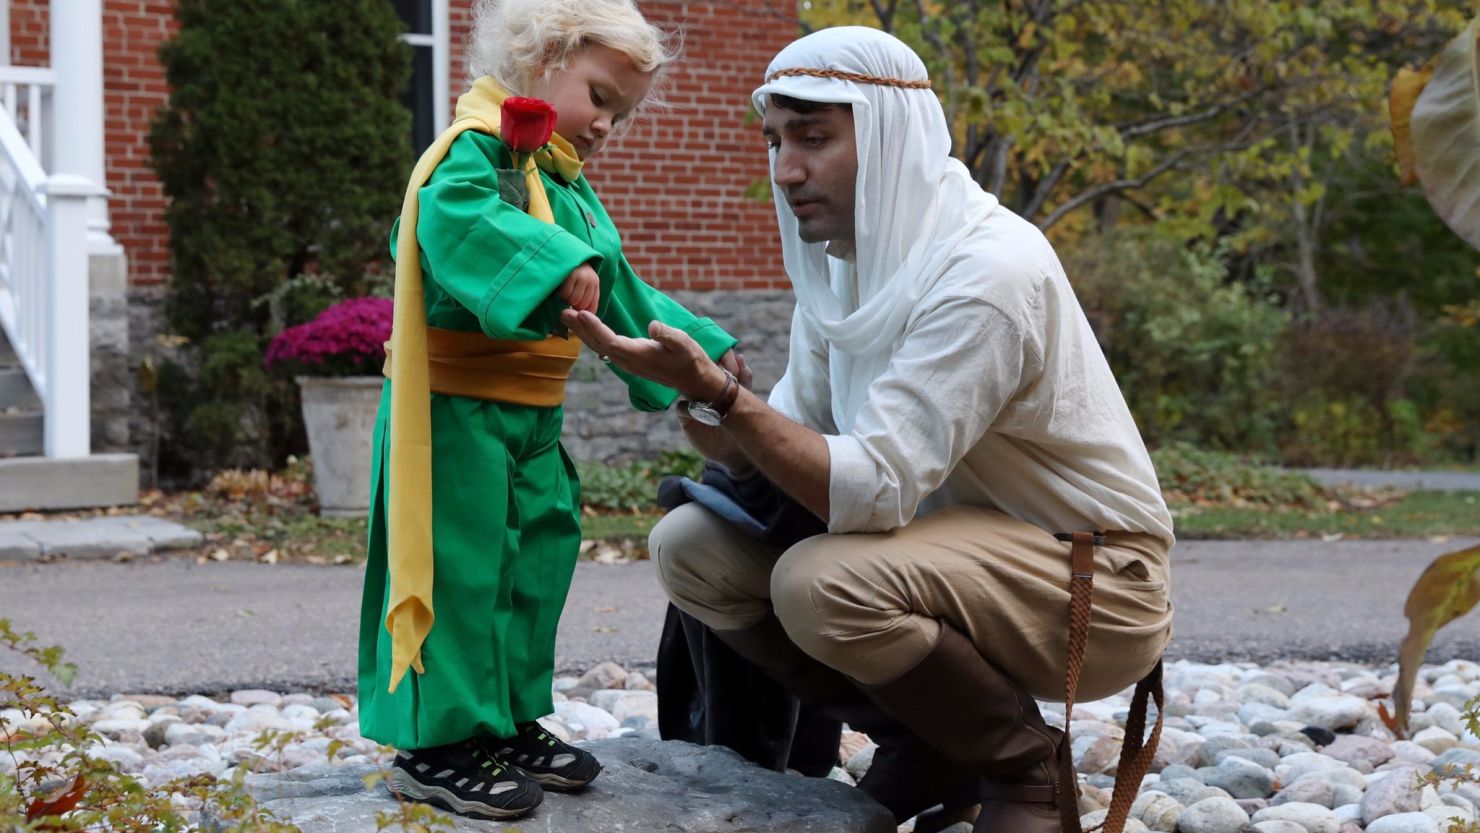 Canadian Prime Minister Justin Trudeau and his son Hadrian celebrate Halloween.